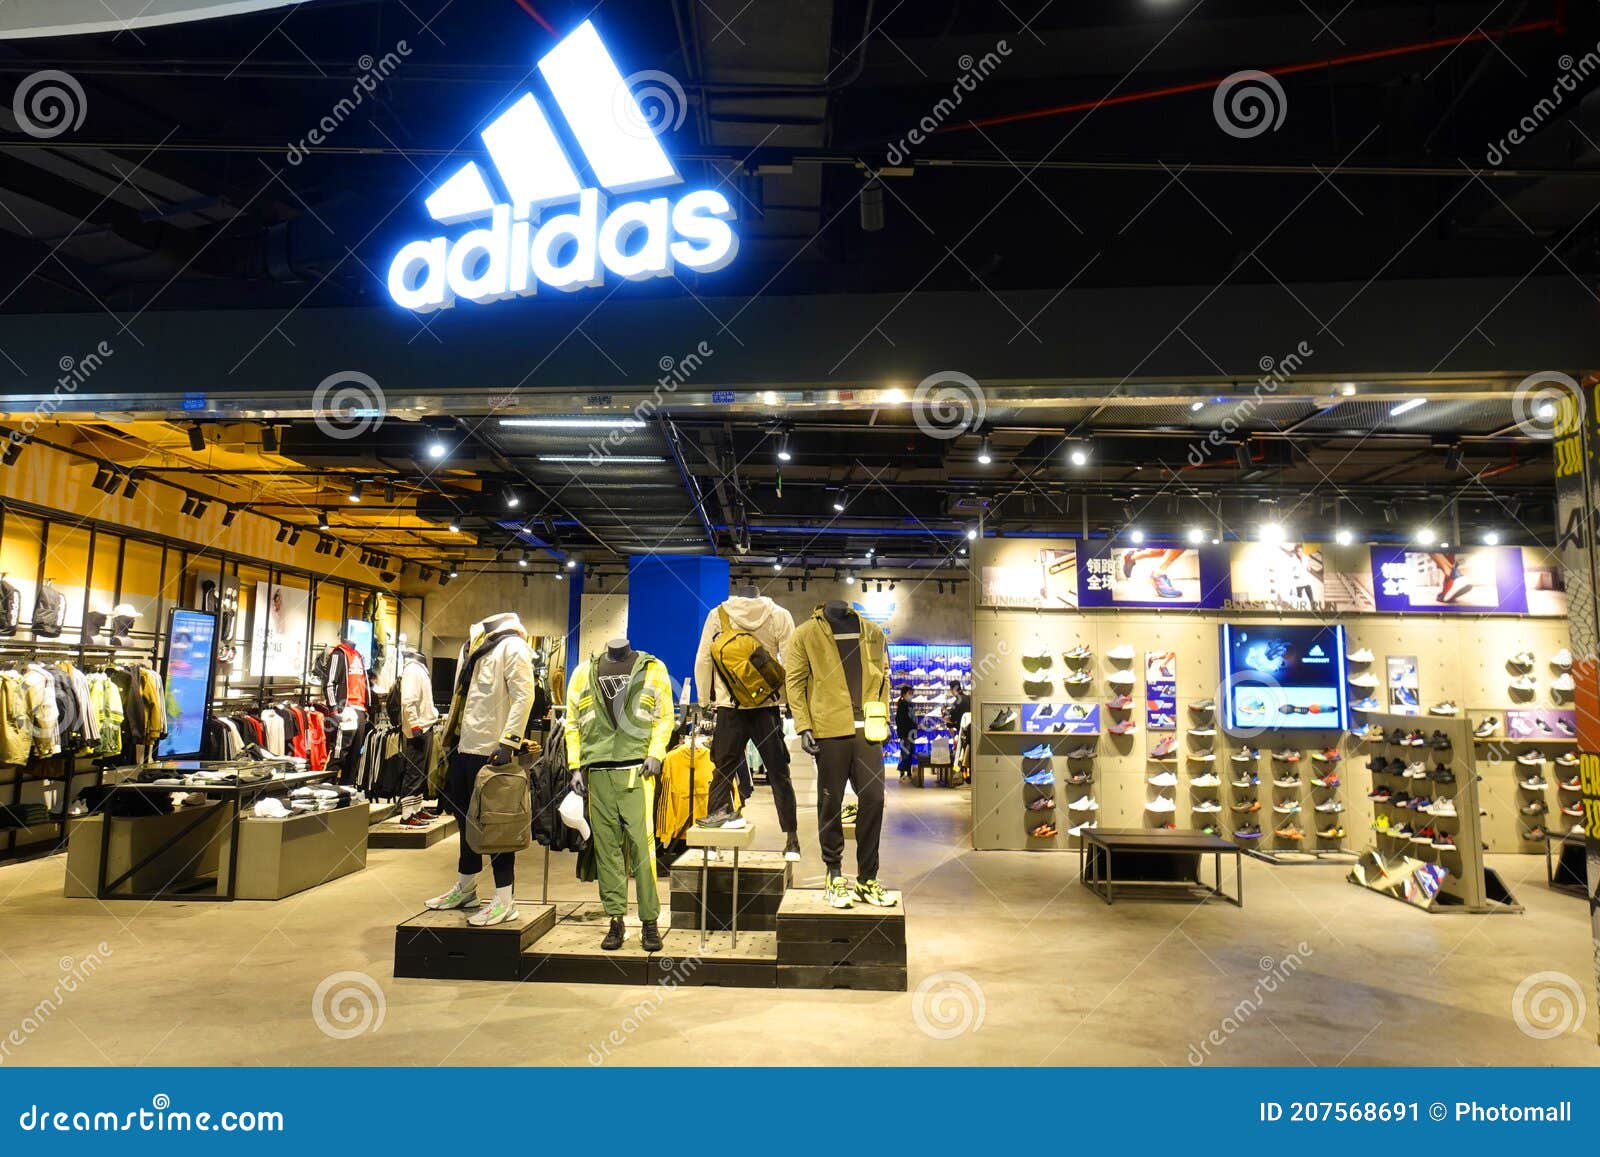 Adidas Logo Retail Shop Front Editorial Photo - Image of artistic: 207568691